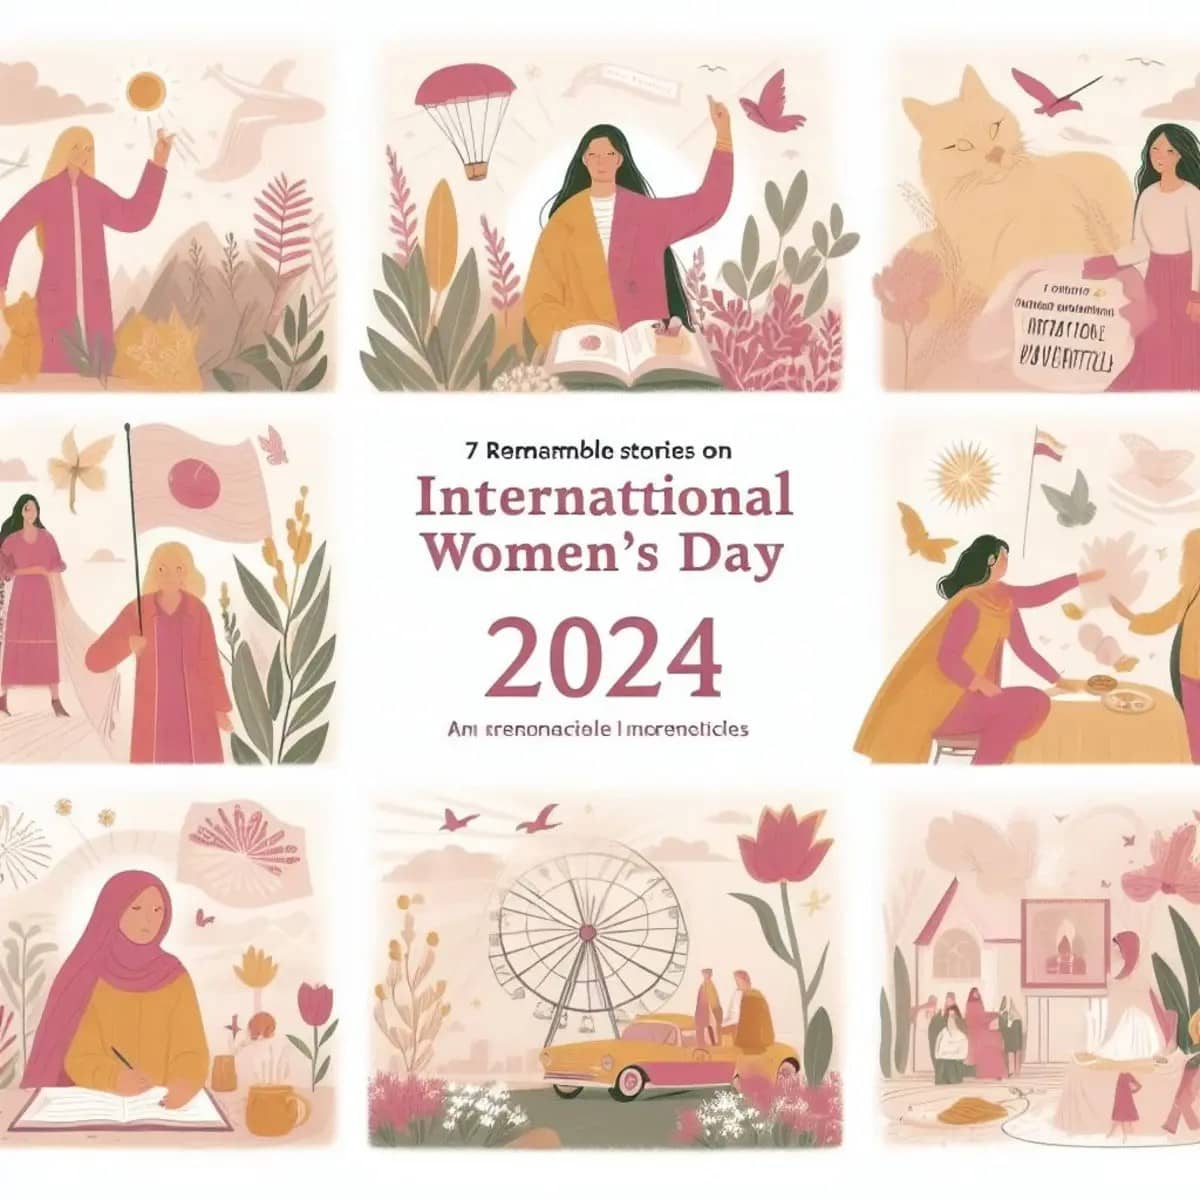 7 Remarkable Stories on International Women's Day 2024